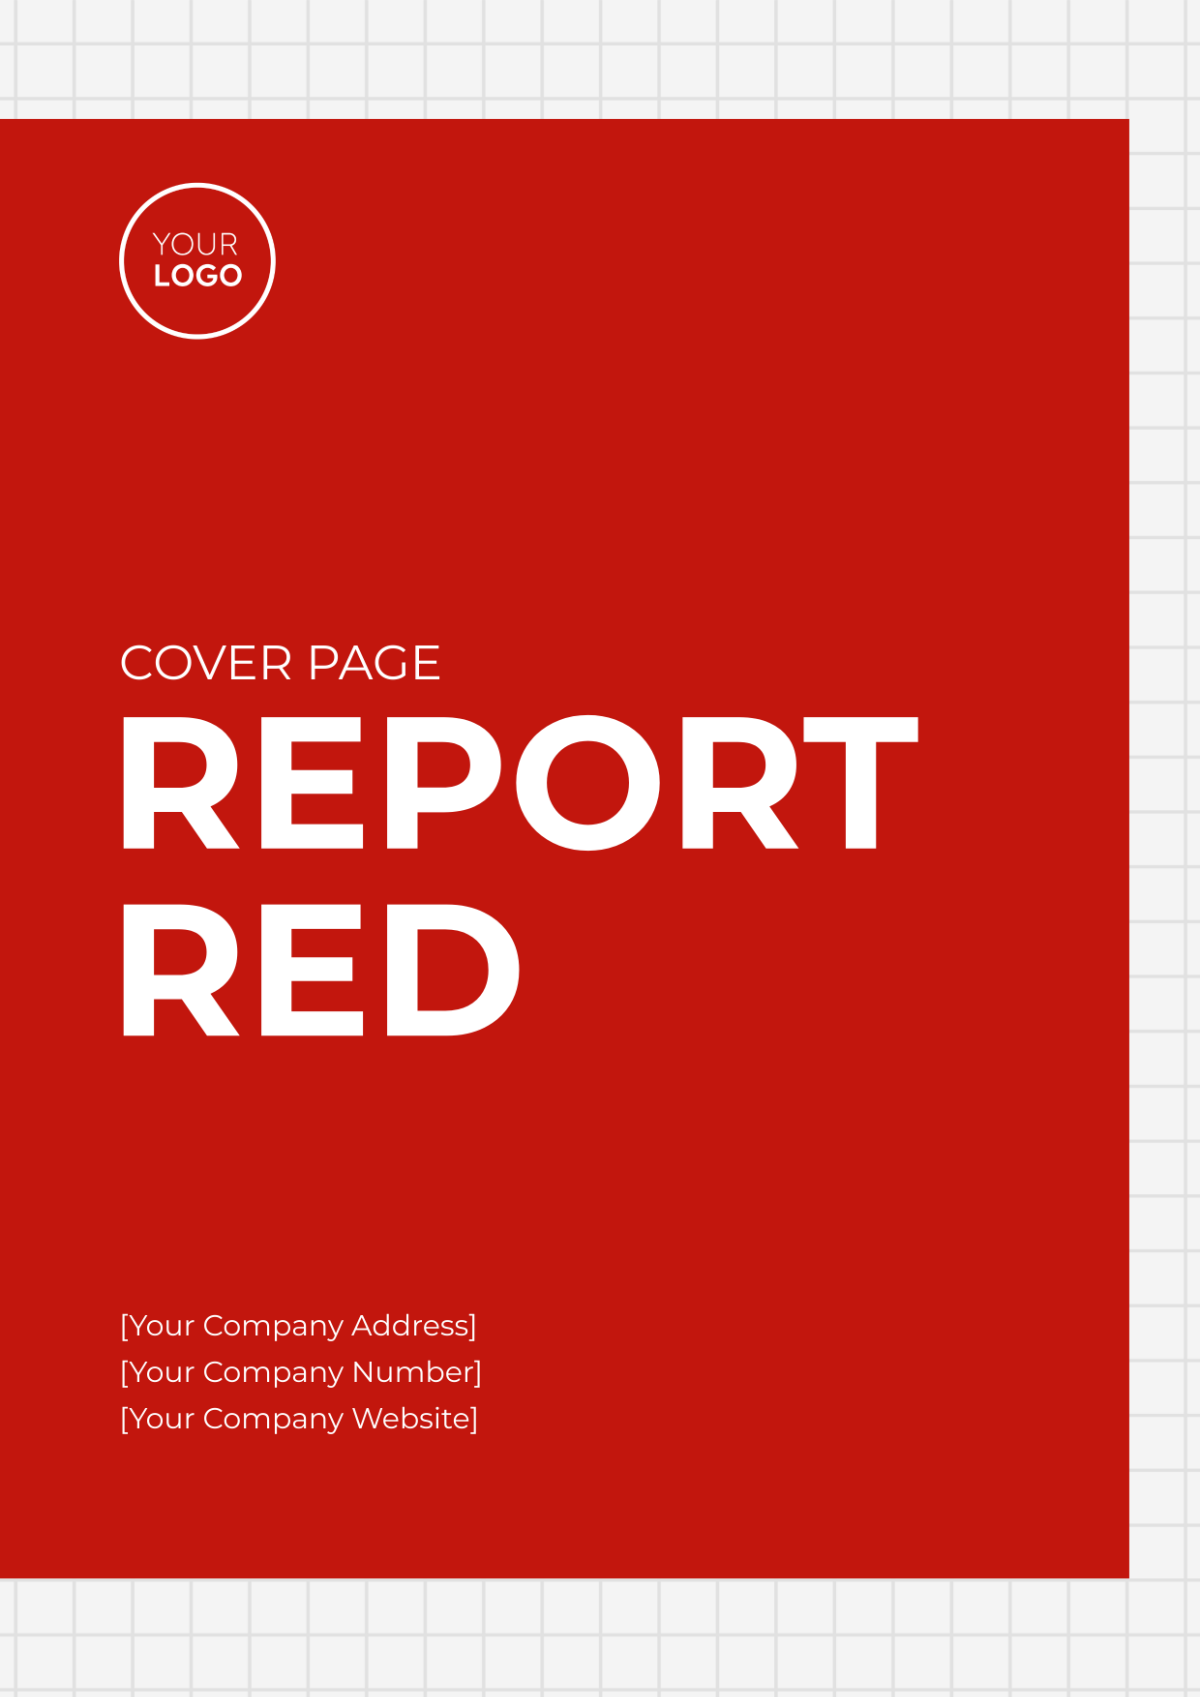 Report Red Cover Page